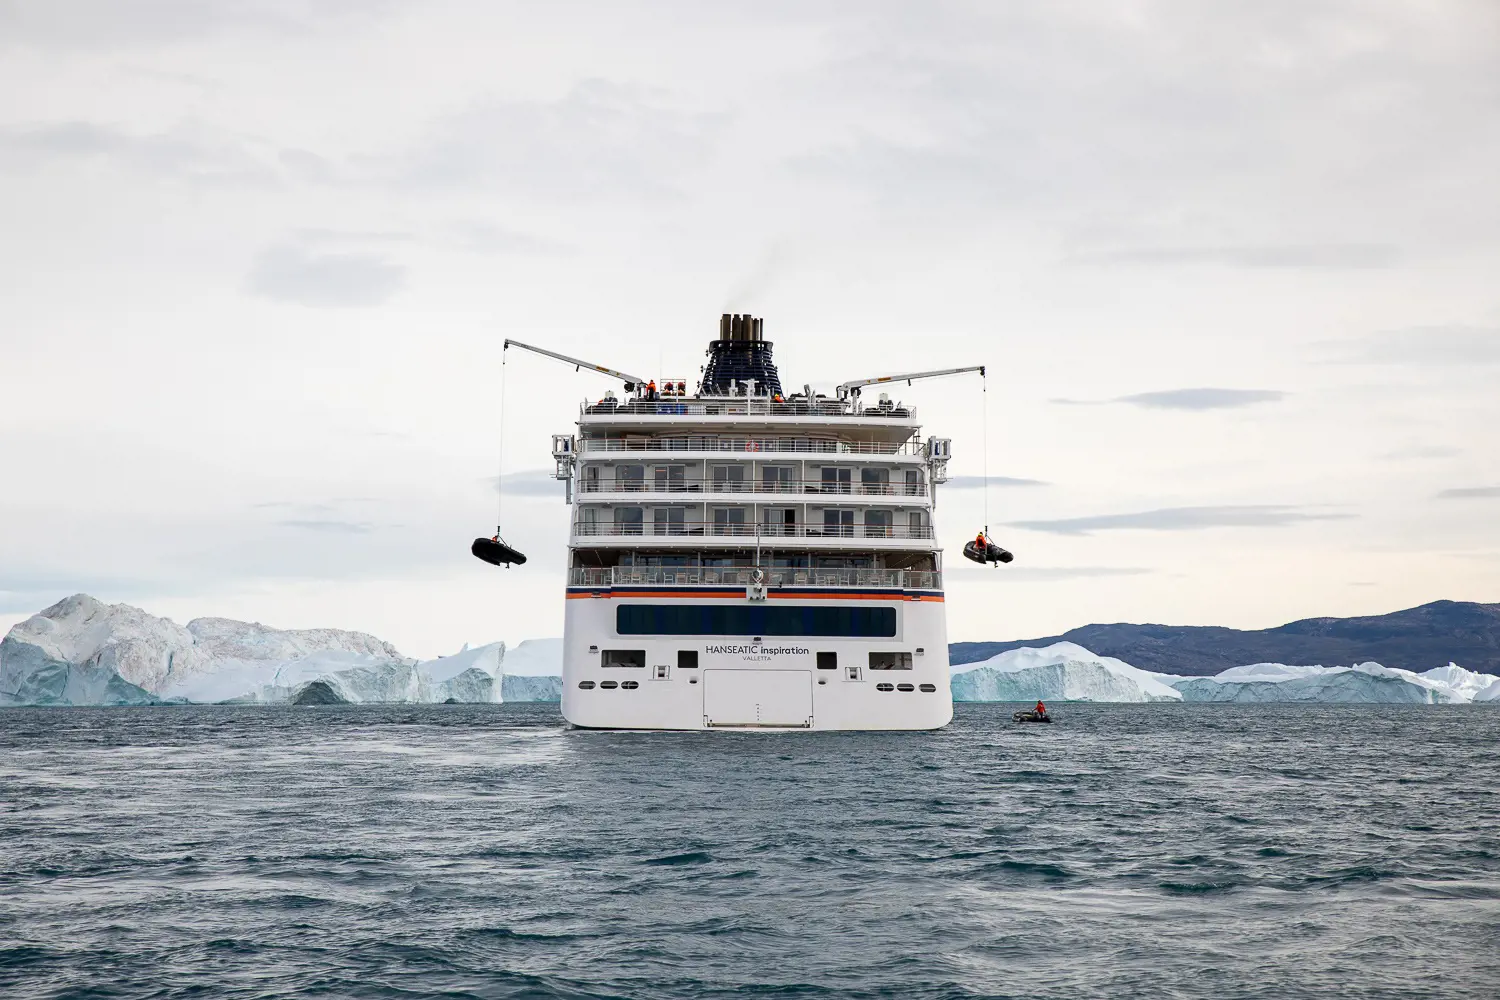 Hanseatic Inspiration sailing through the west coast of Greenland to the Canadian Arctic